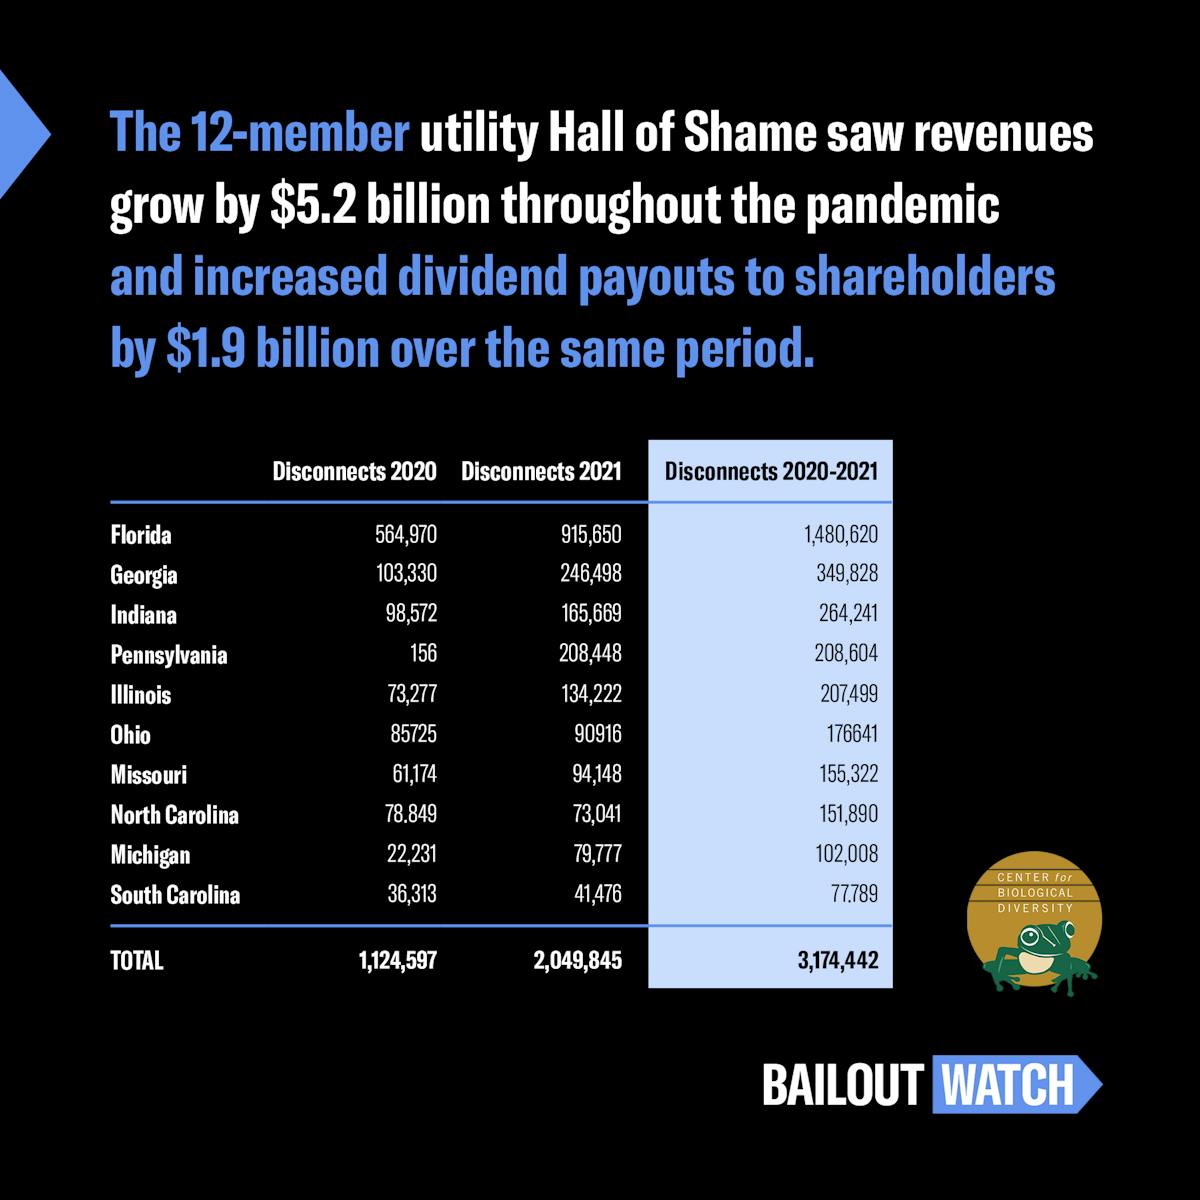 Graphic with a table outlining how many disconnects happened in 10 states over 2020-2021, with text saying "The 12-member utility Hall of Shame saw revenues grow by $5.2 billion throughout the pandemic and increased dividend payouts to shareholders by $1.9 billion over the same period.